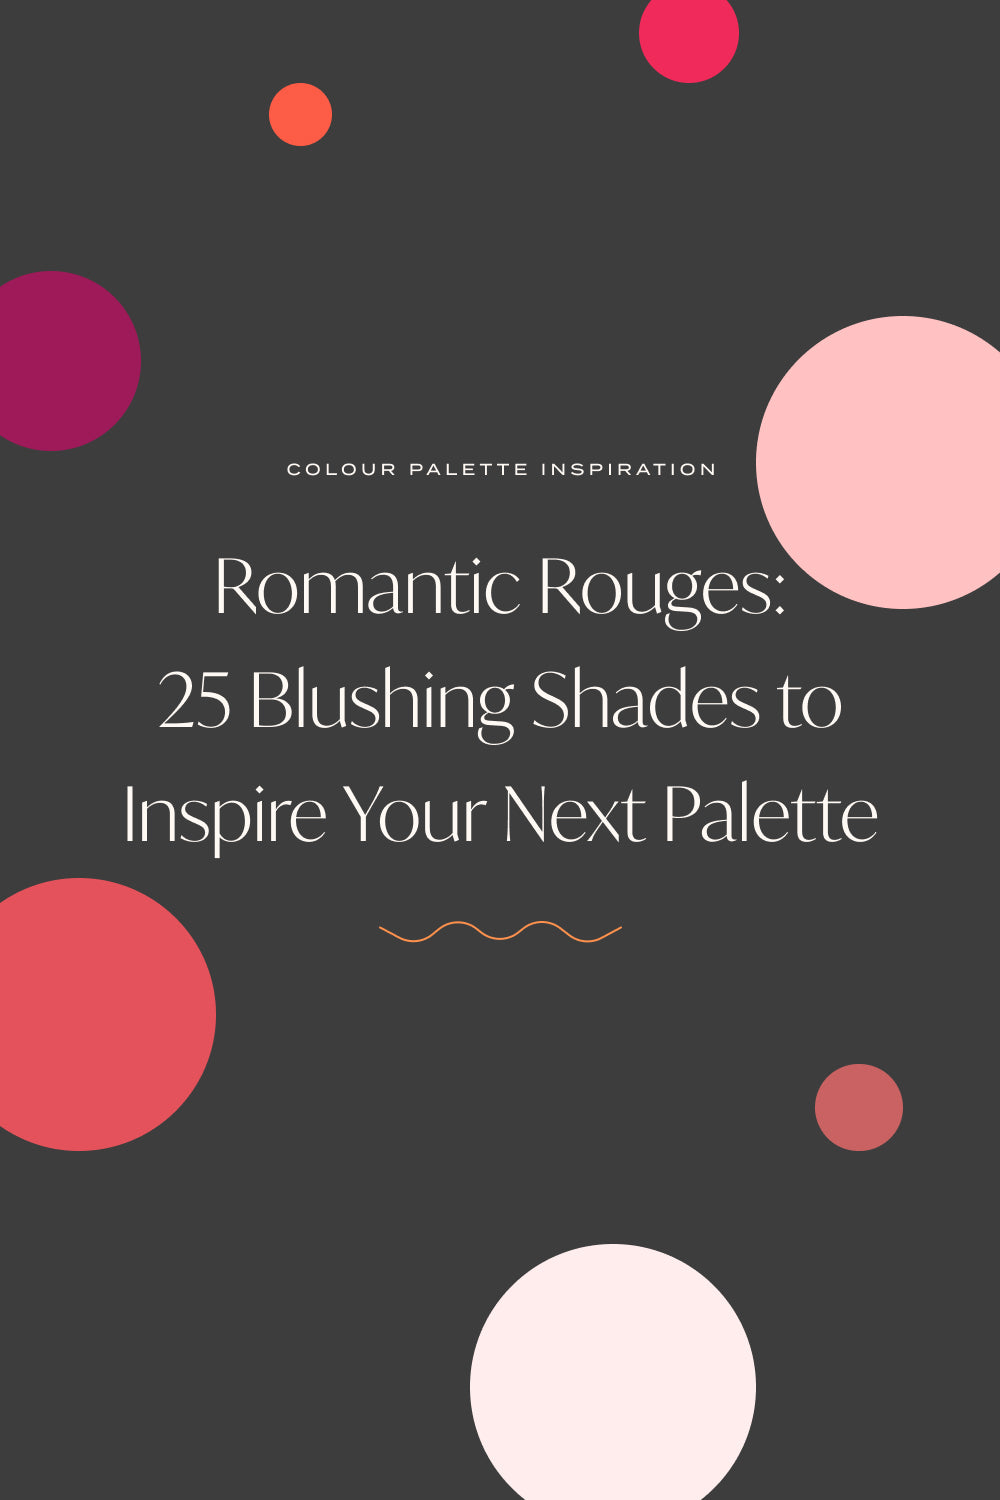 Romantic Rouges: 25 Blushing Shades to Inspire Your Next Palette